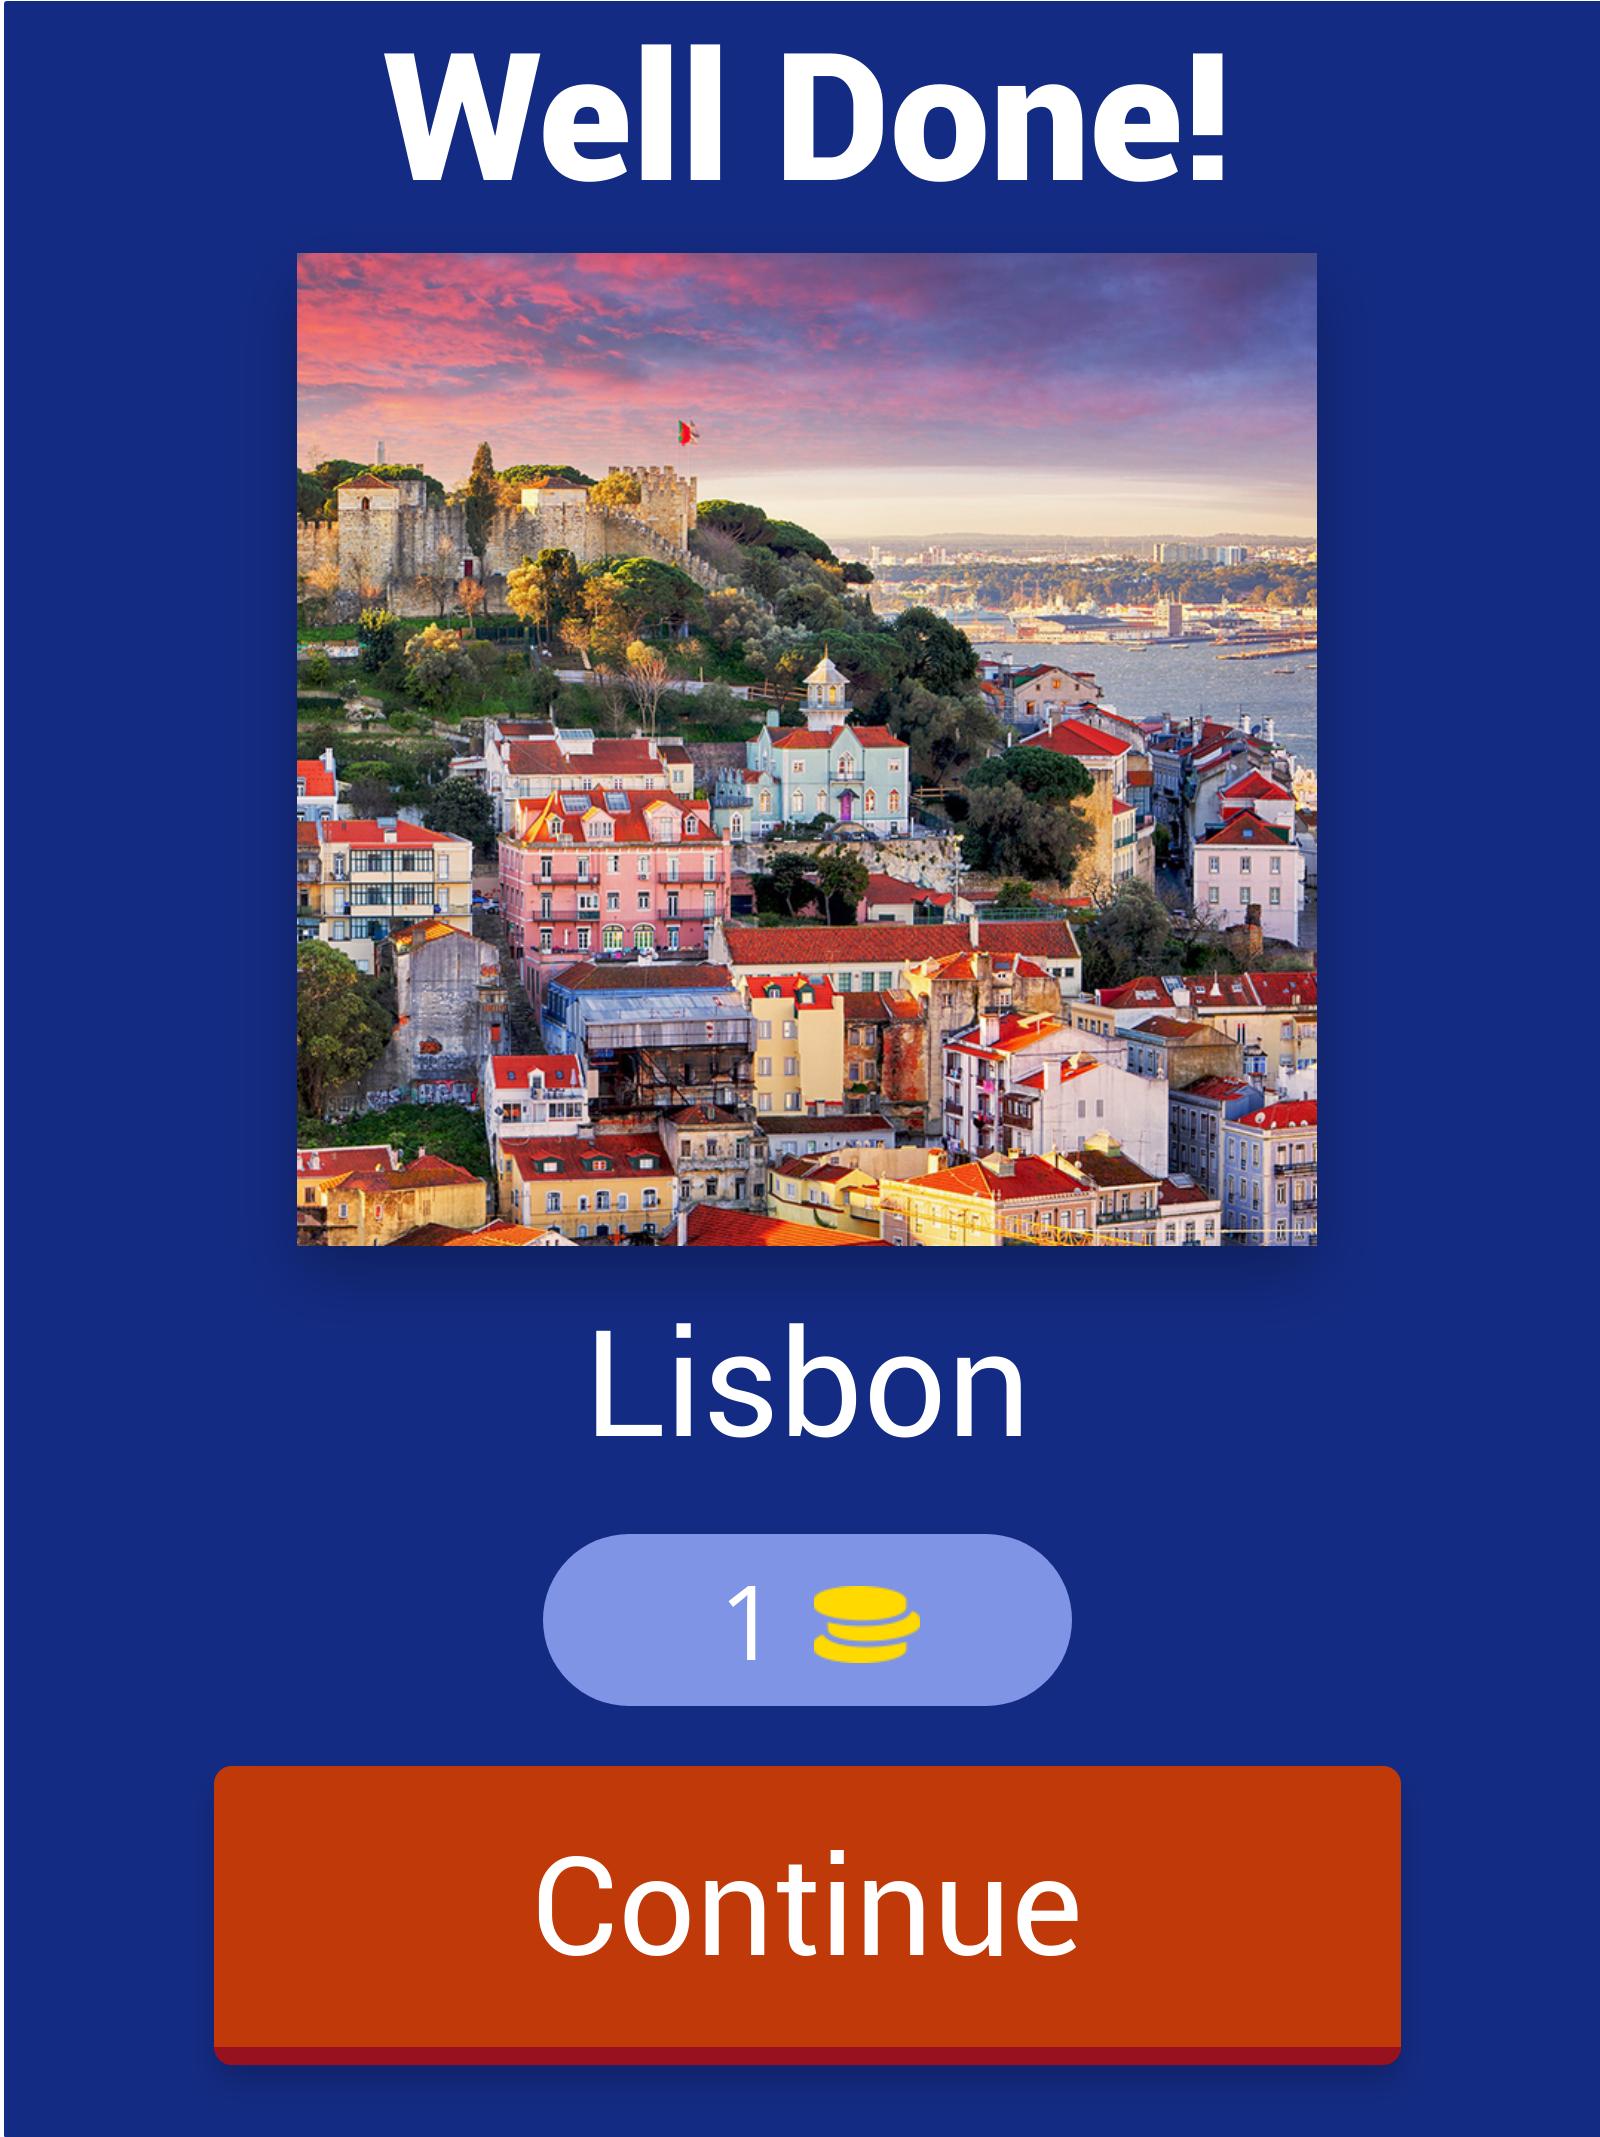 QUIZ - Guess the Capital city for Android - APK Download